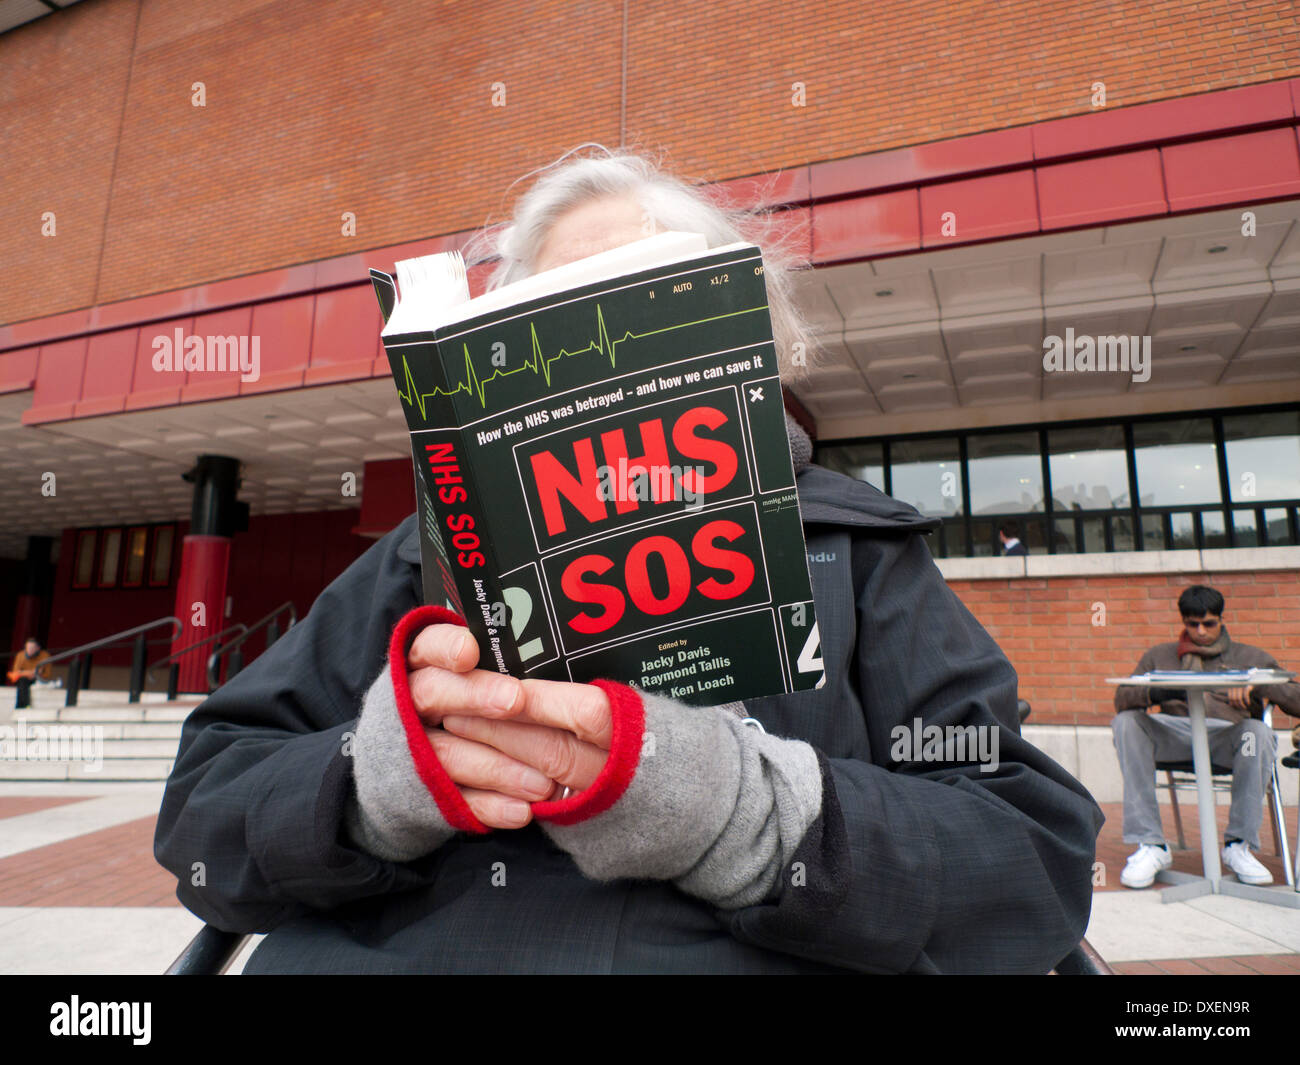 Woman reading NHS SOS book in the courtyard ot The British Library, Euston London England UK    KATHY DEWITT Stock Photo